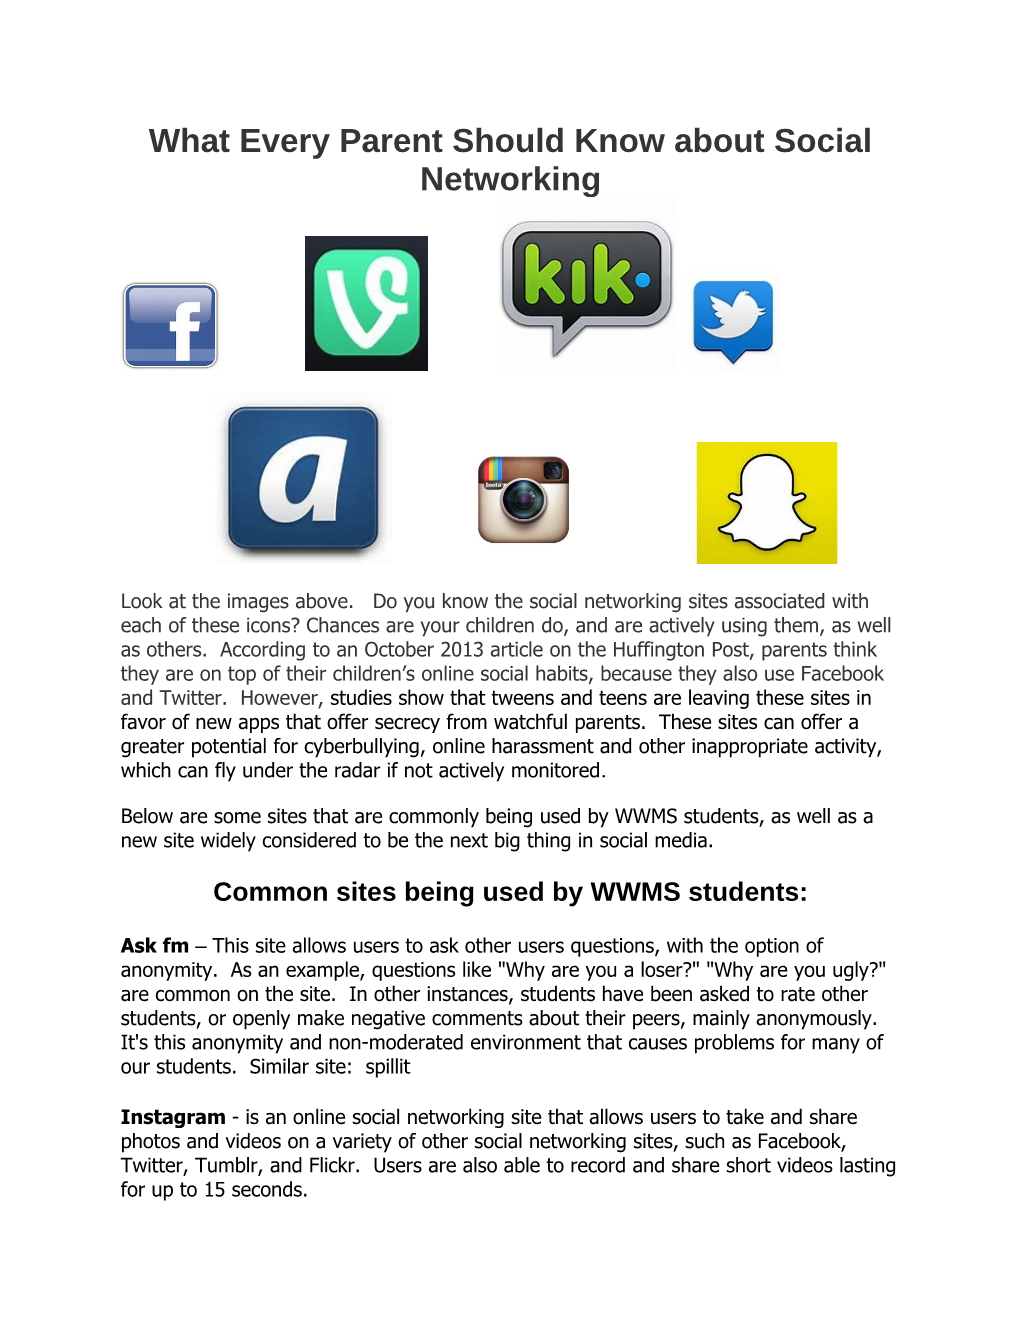 What Every Parent Should Know About Social Networking